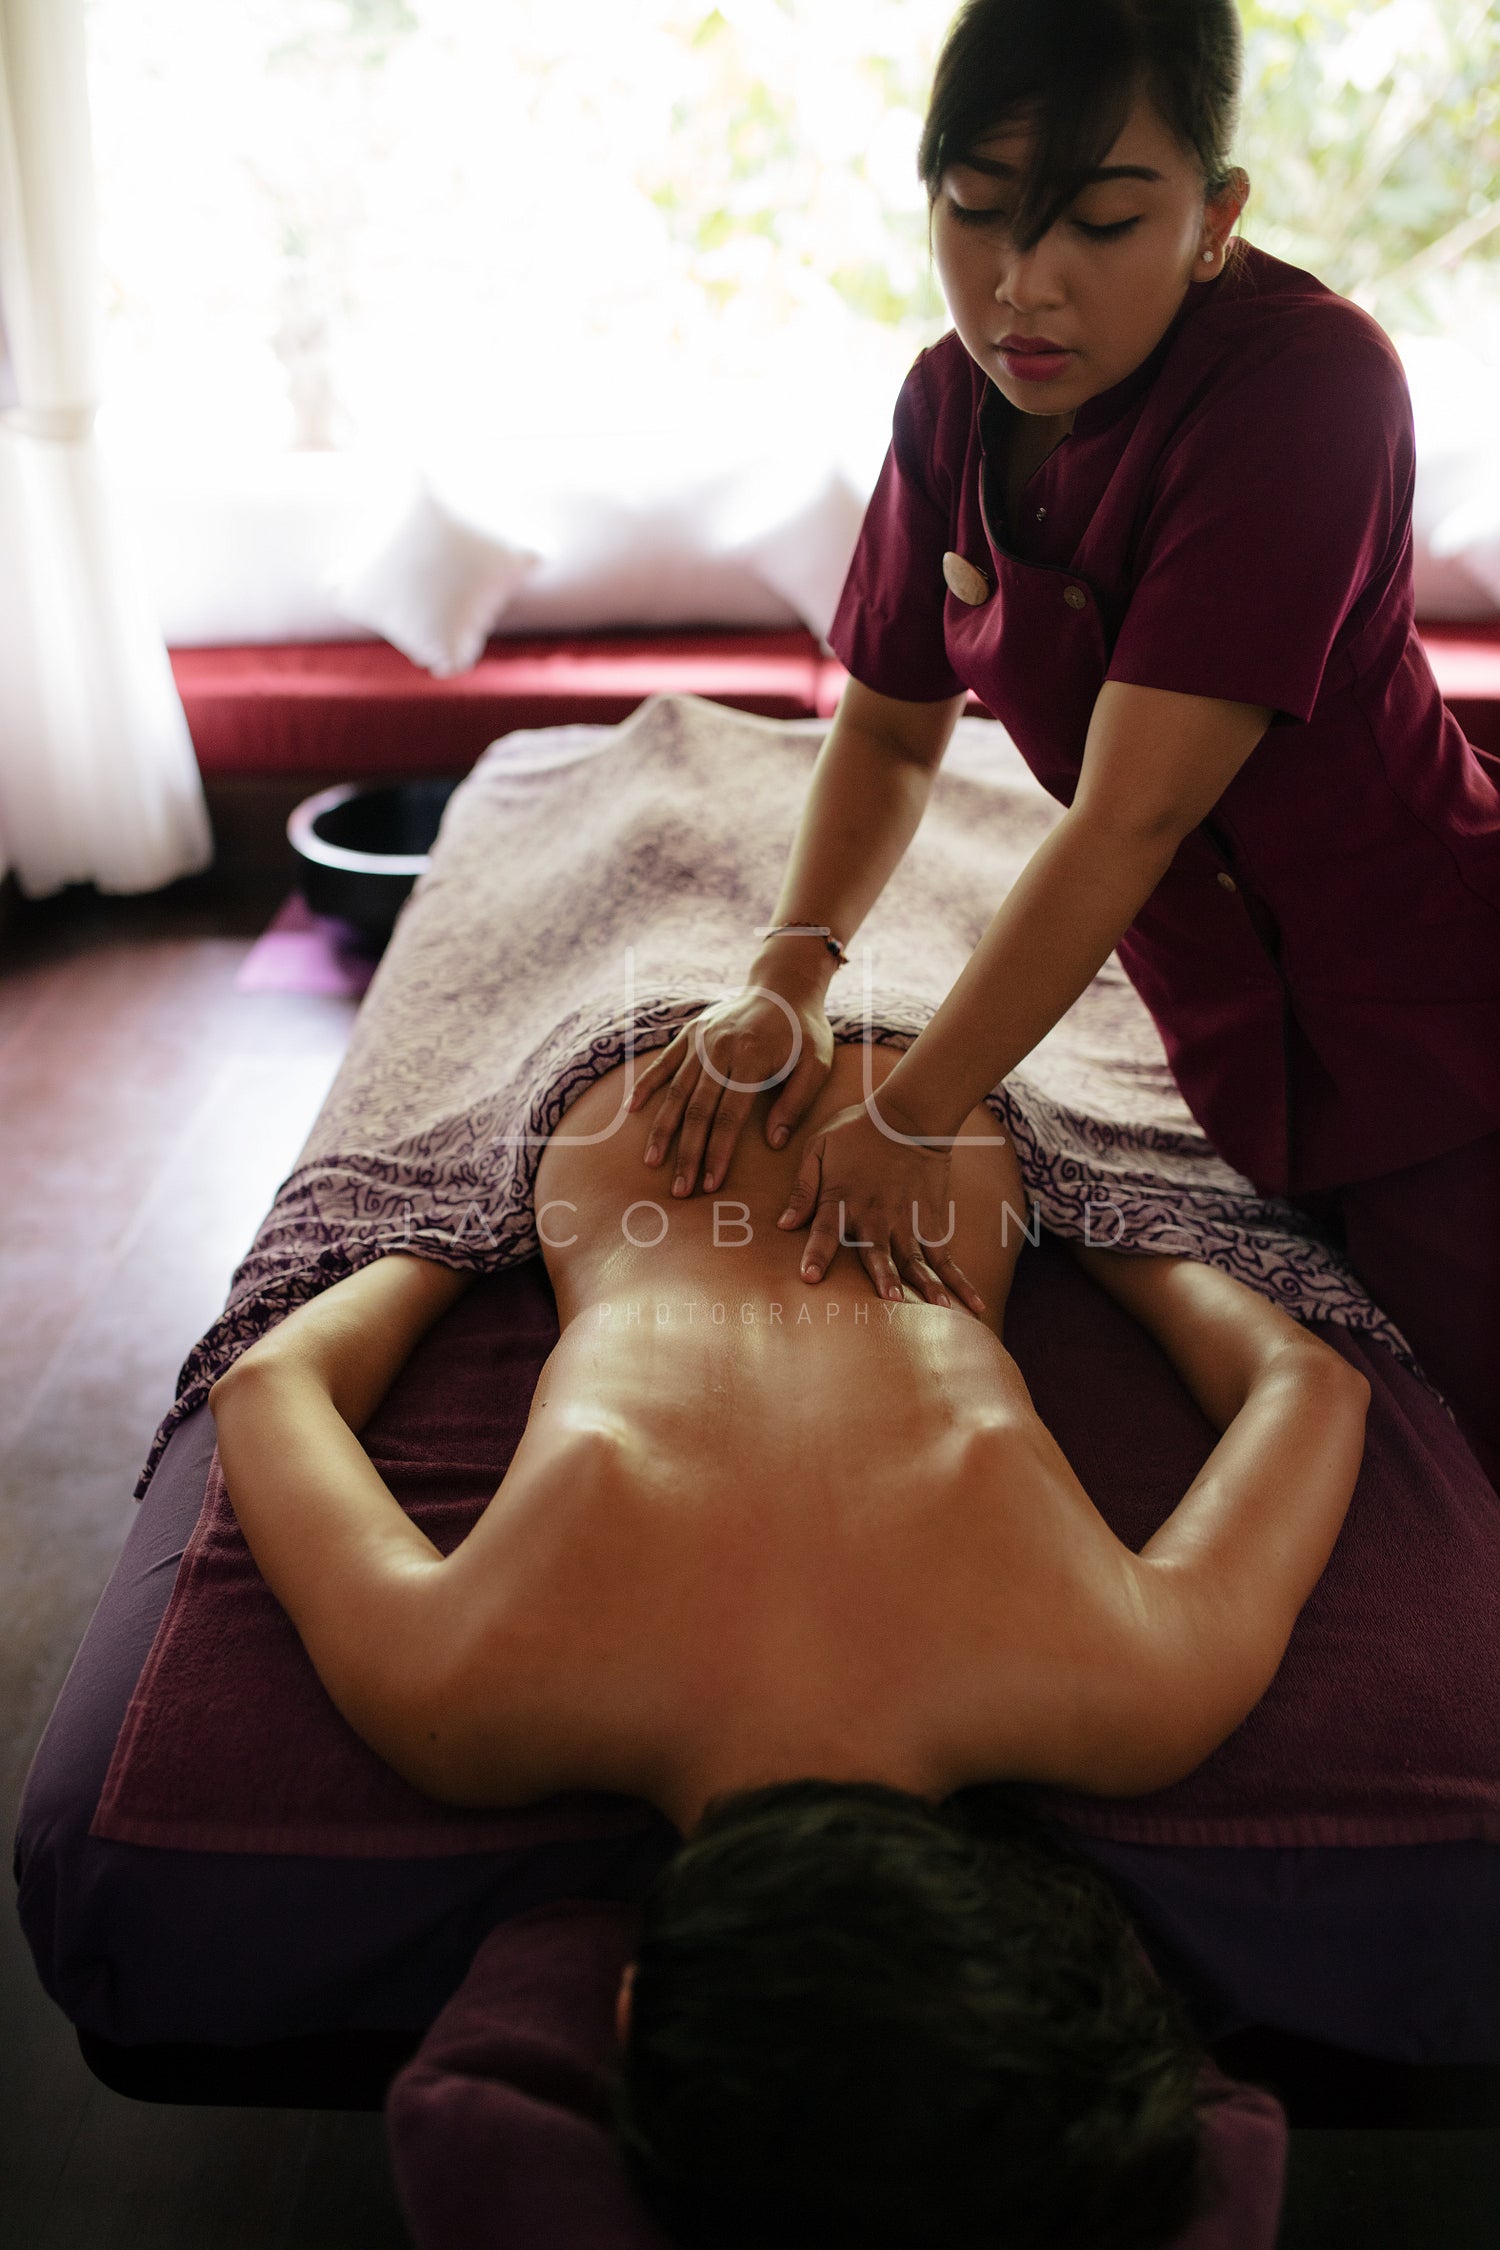 Woman getting back massage at spa resort – Jacob Lund Photography